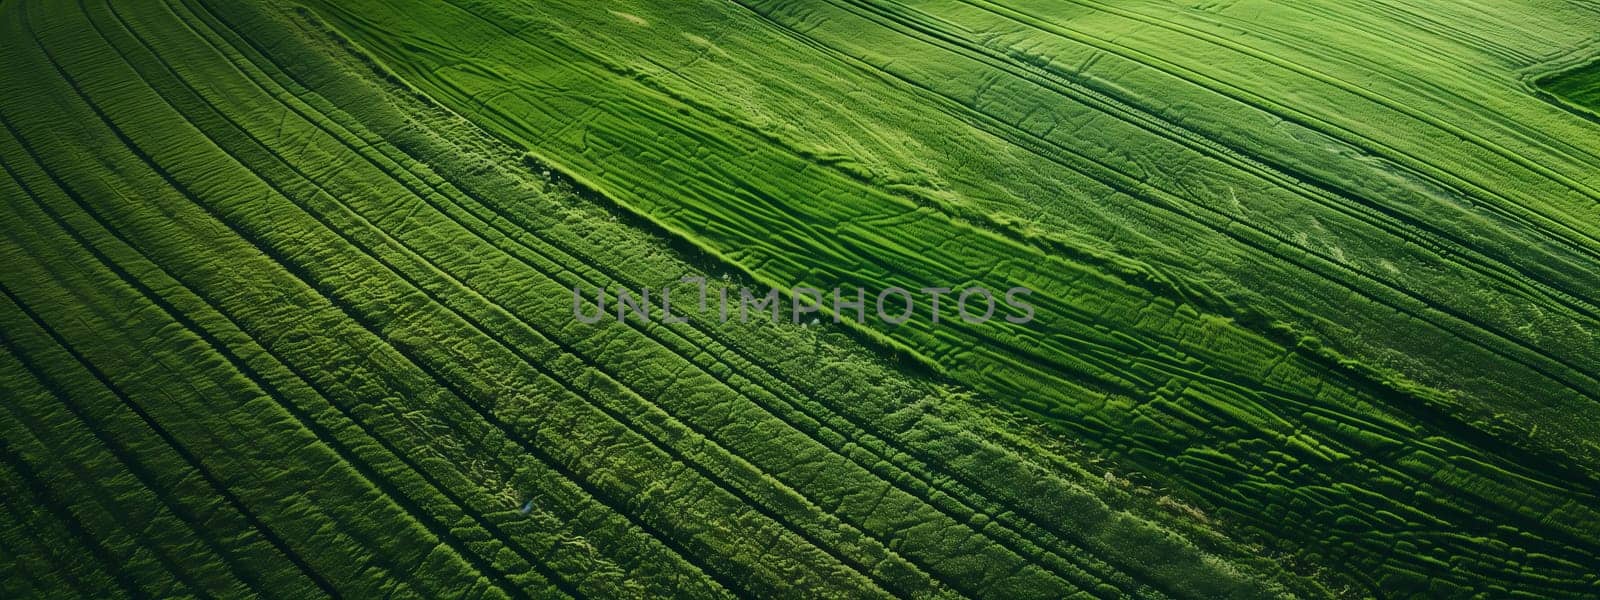 Aerial view of a thriving wheat field in the grassy landscape by richwolf